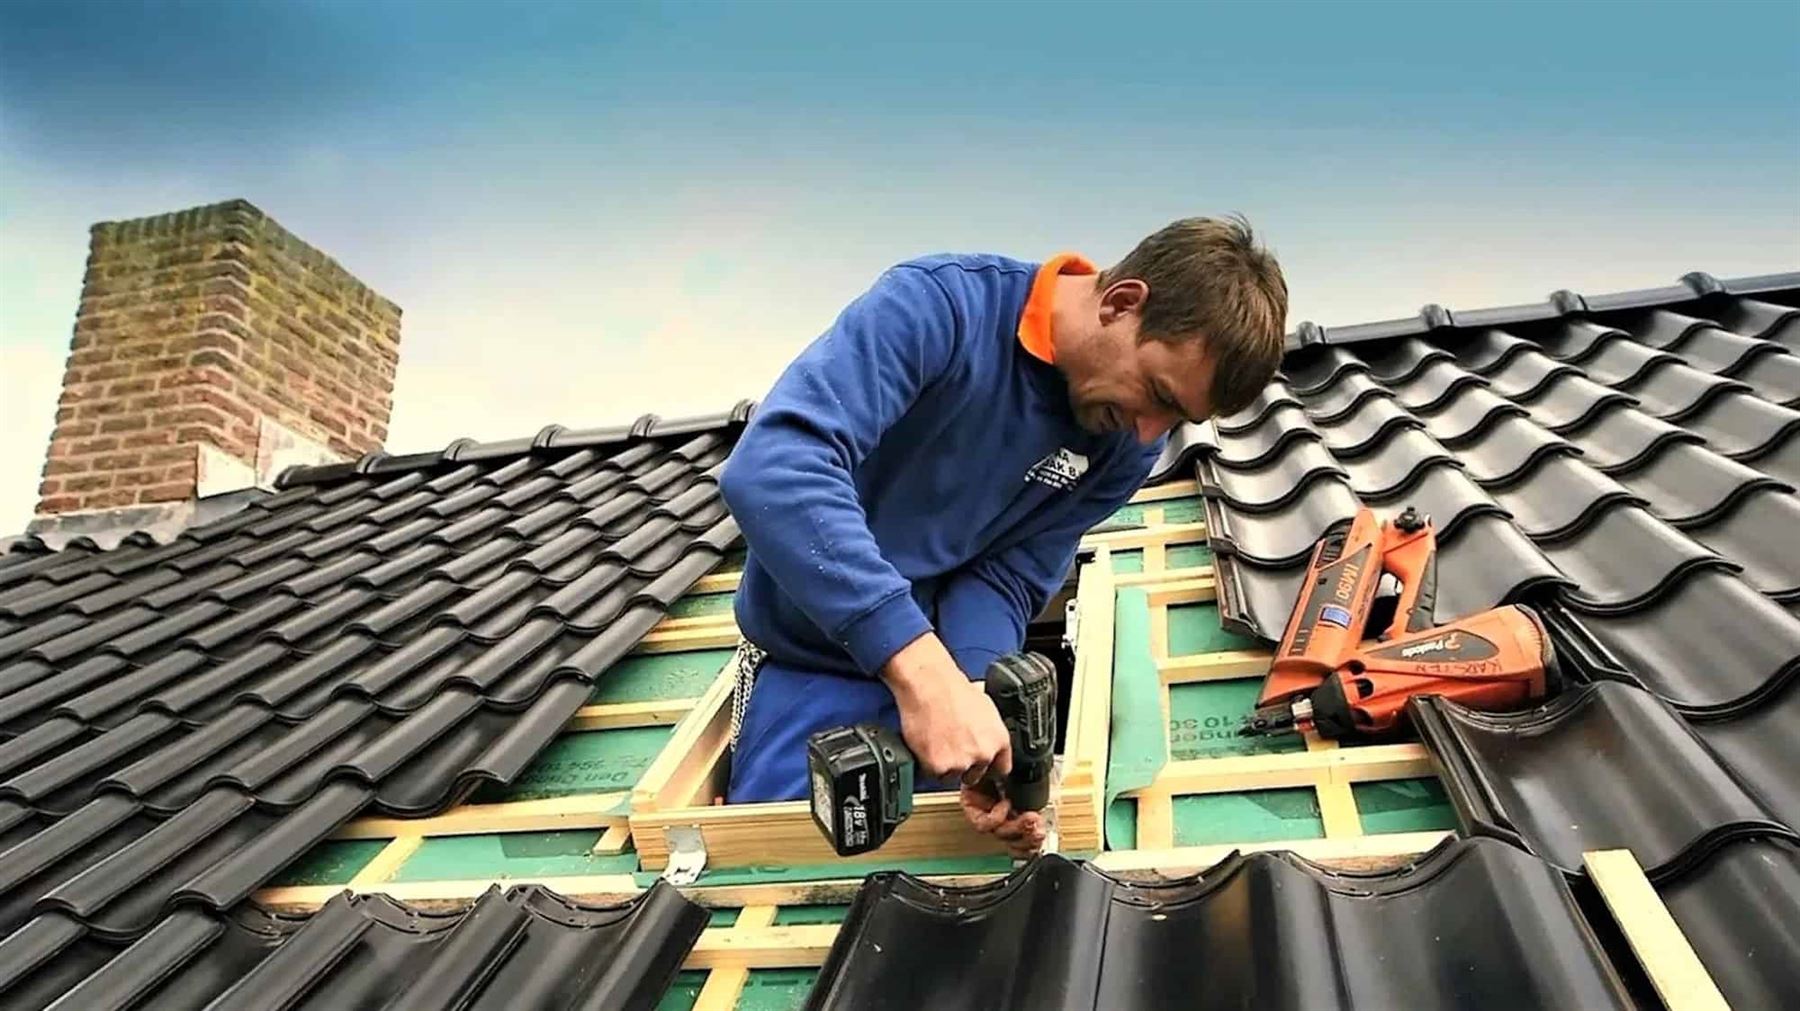 The Quality Roofers